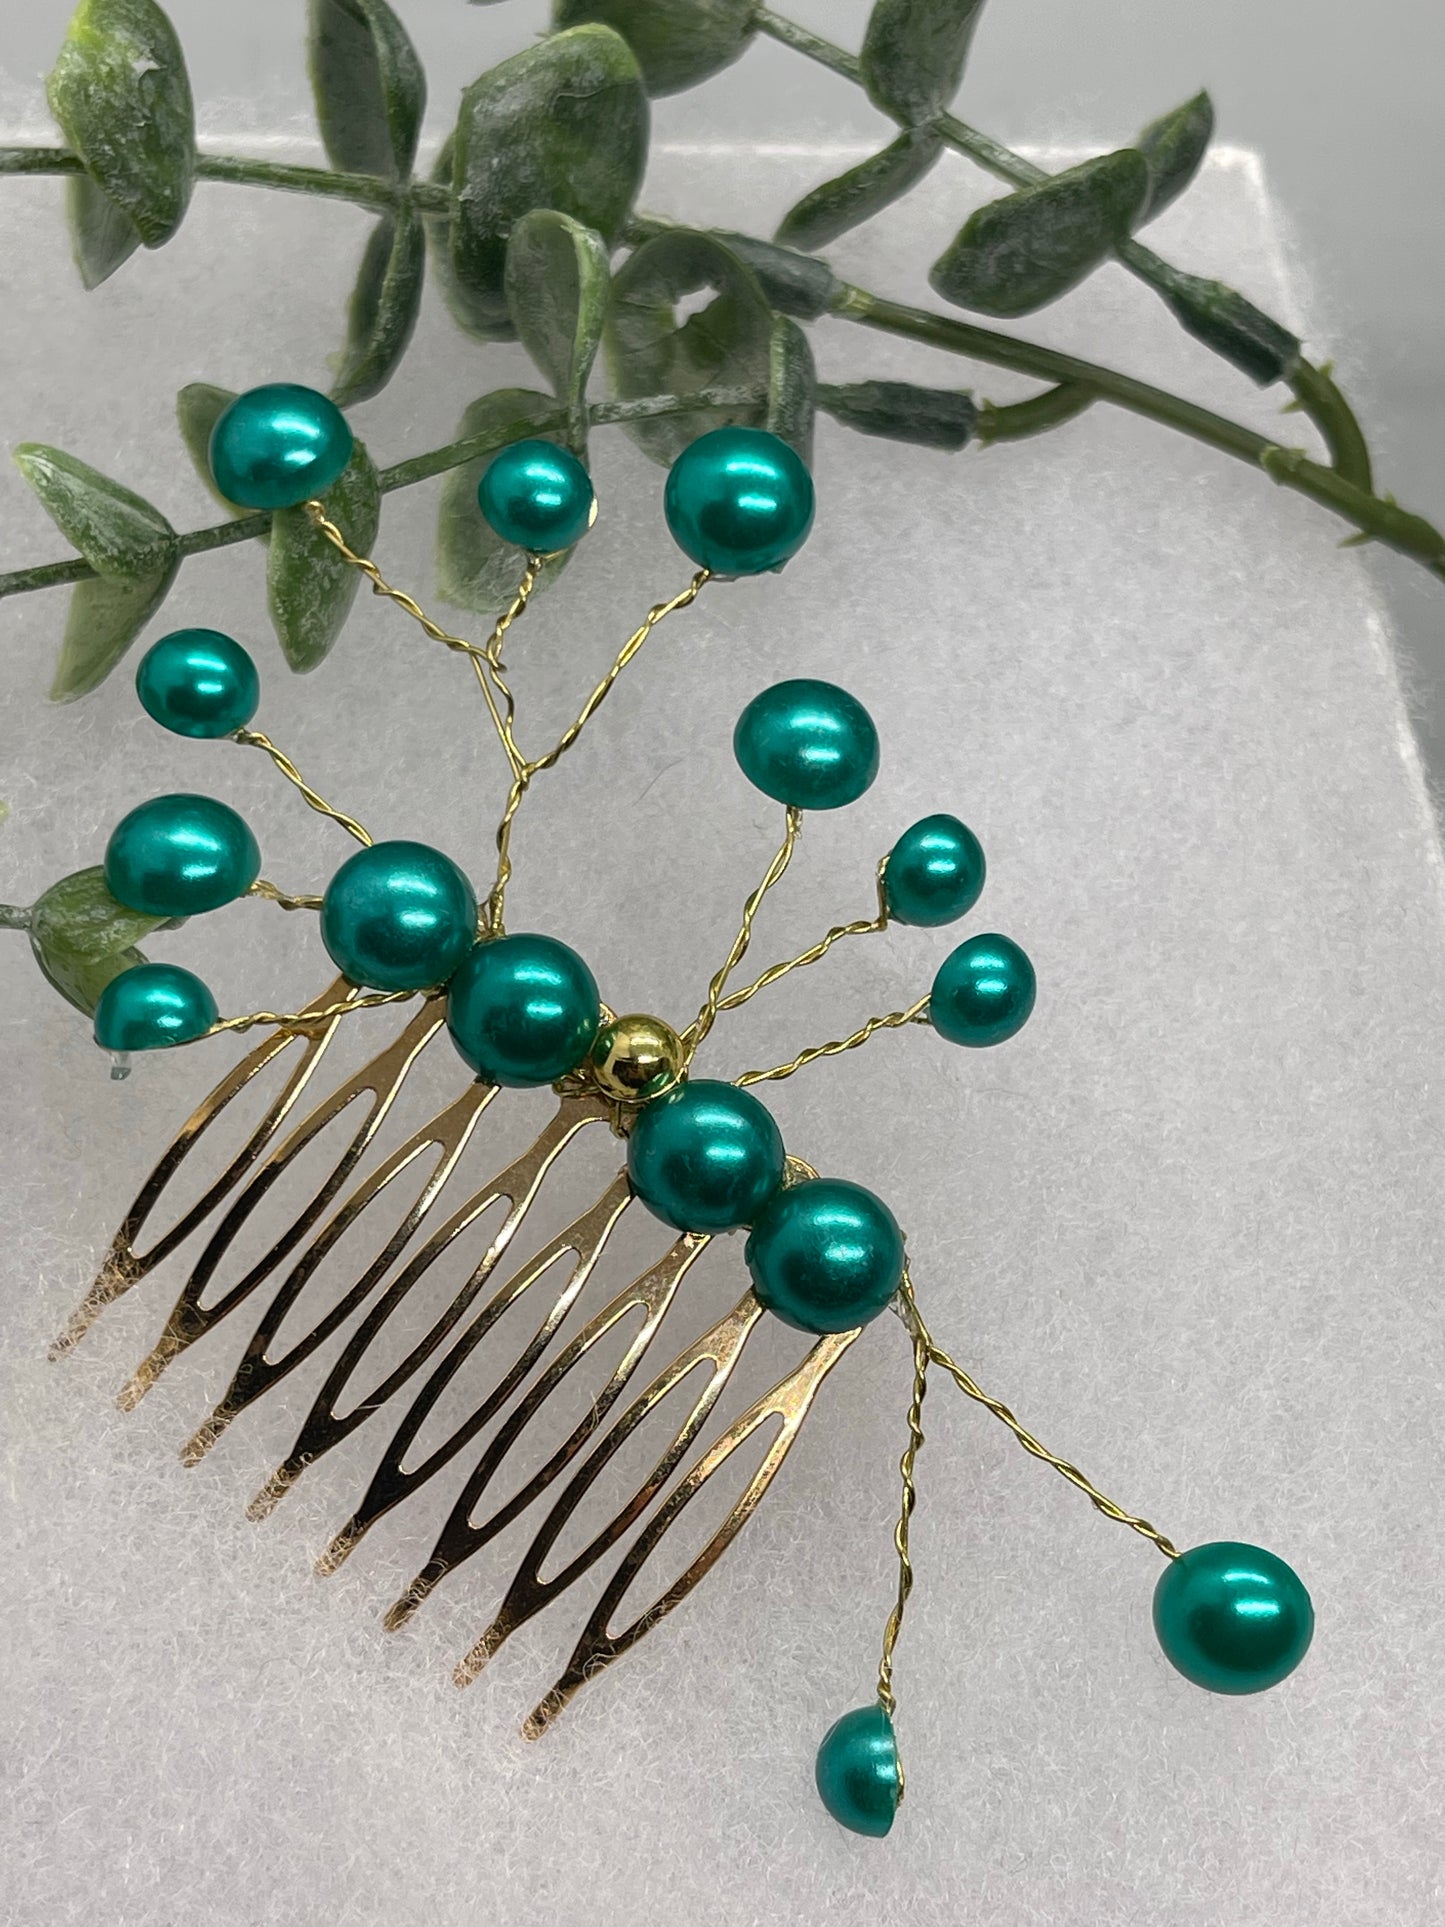 Teal faux Pearl 2.0” gold tone bridal side Comb accents vine handmade by hairdazzzel wedding accessory bride princess